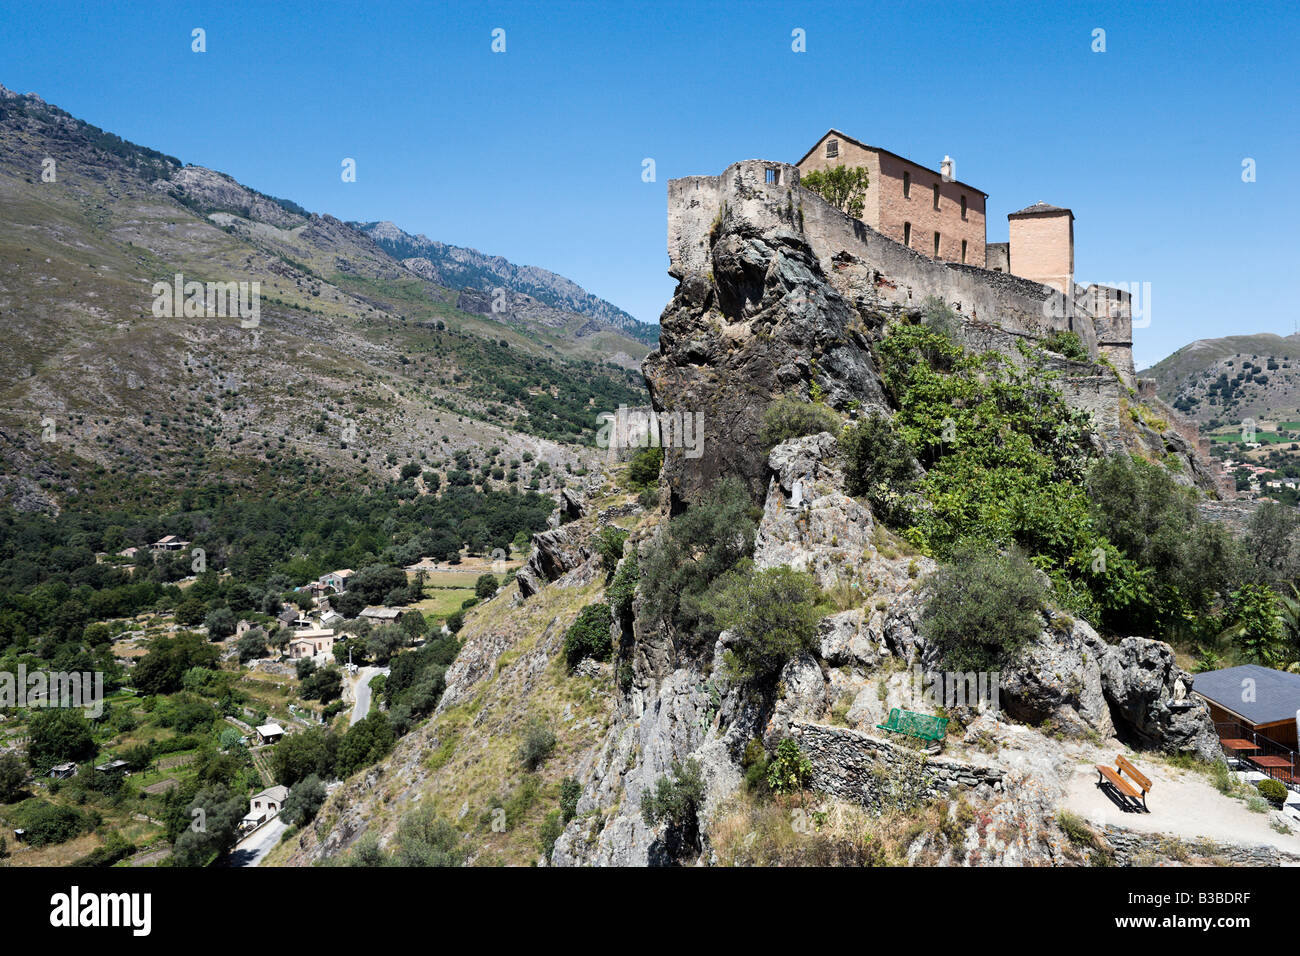 The citadelle in the haute ville (old town), Corte (former capital of independent Corsica), Central Corsica, France Stock Photo